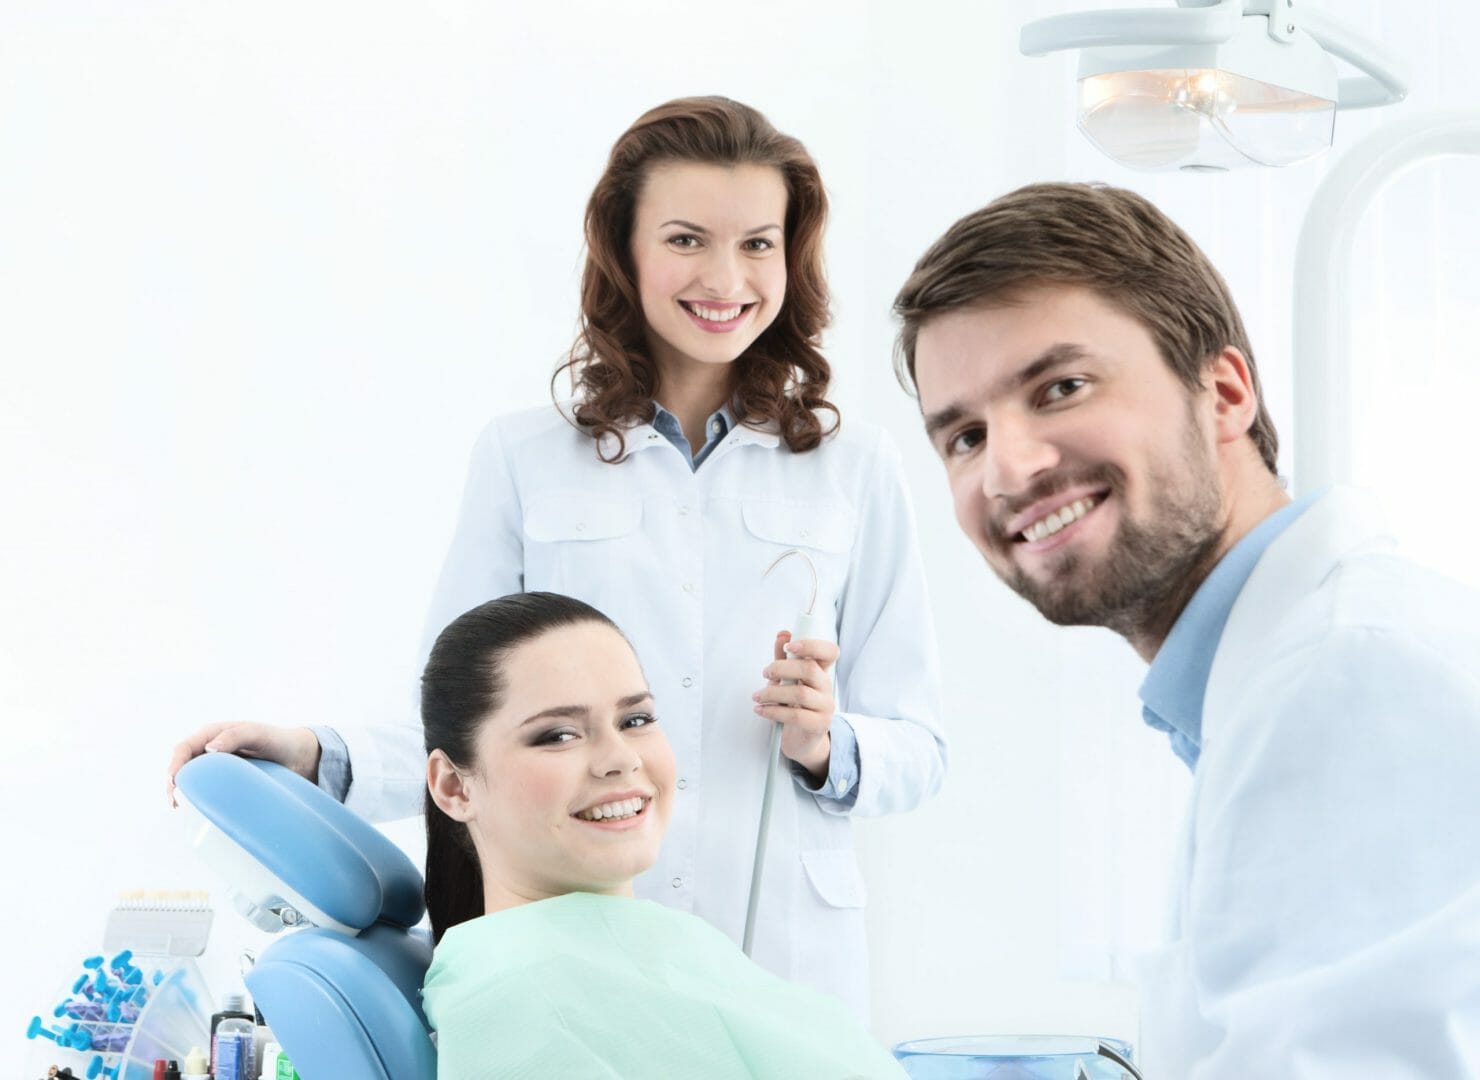 Does Dental Sedation Help You to Relax? – Dental Implant Center NYC Smile Makeover